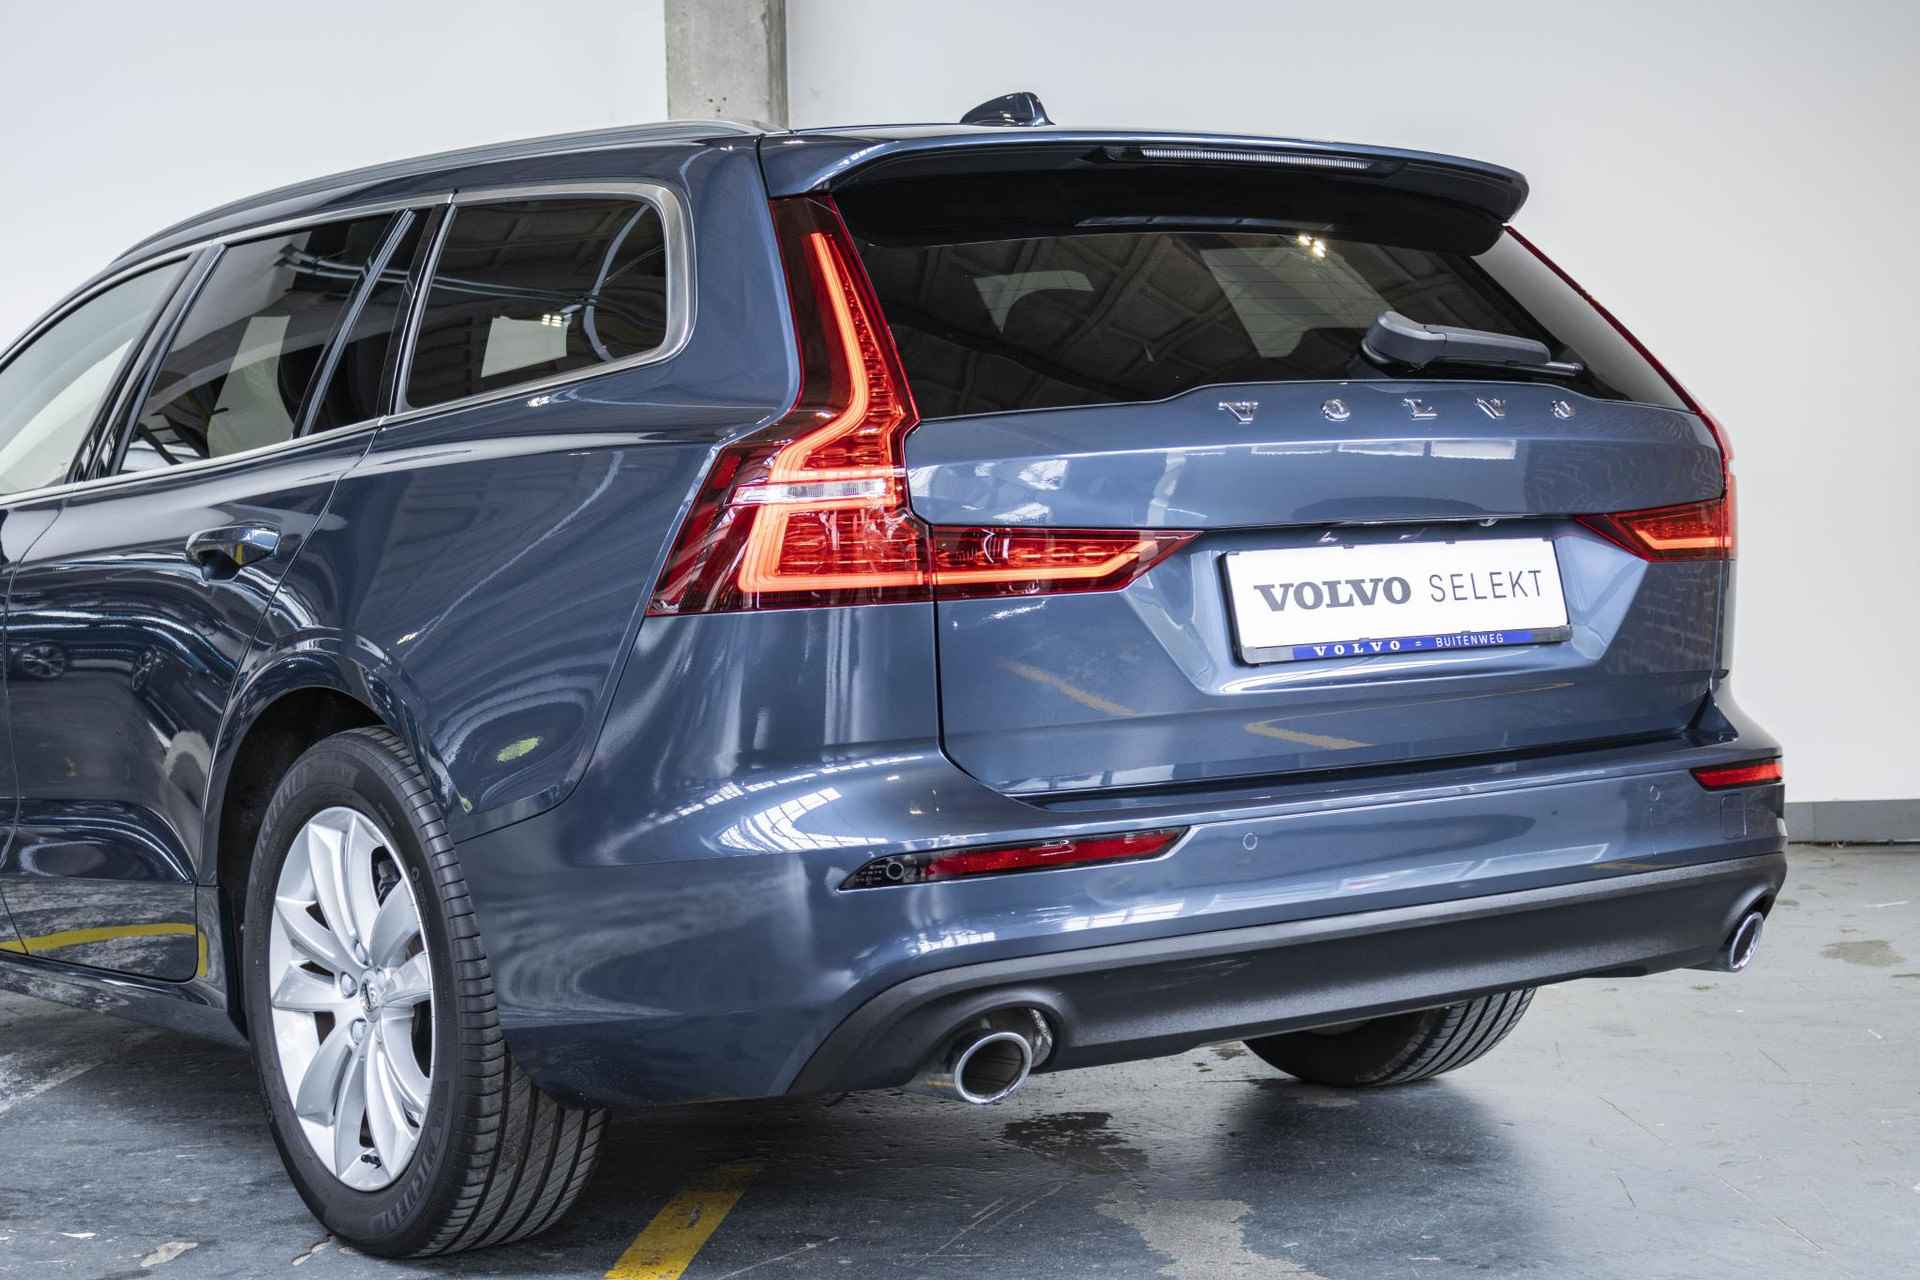 Volvo V60 B4 Automaat Business Pro | Blind Spot | Parkeercamera | Park Assist voor en achter | Adaptive cruise control | Extra getint glas | Keyless entree - 6/40